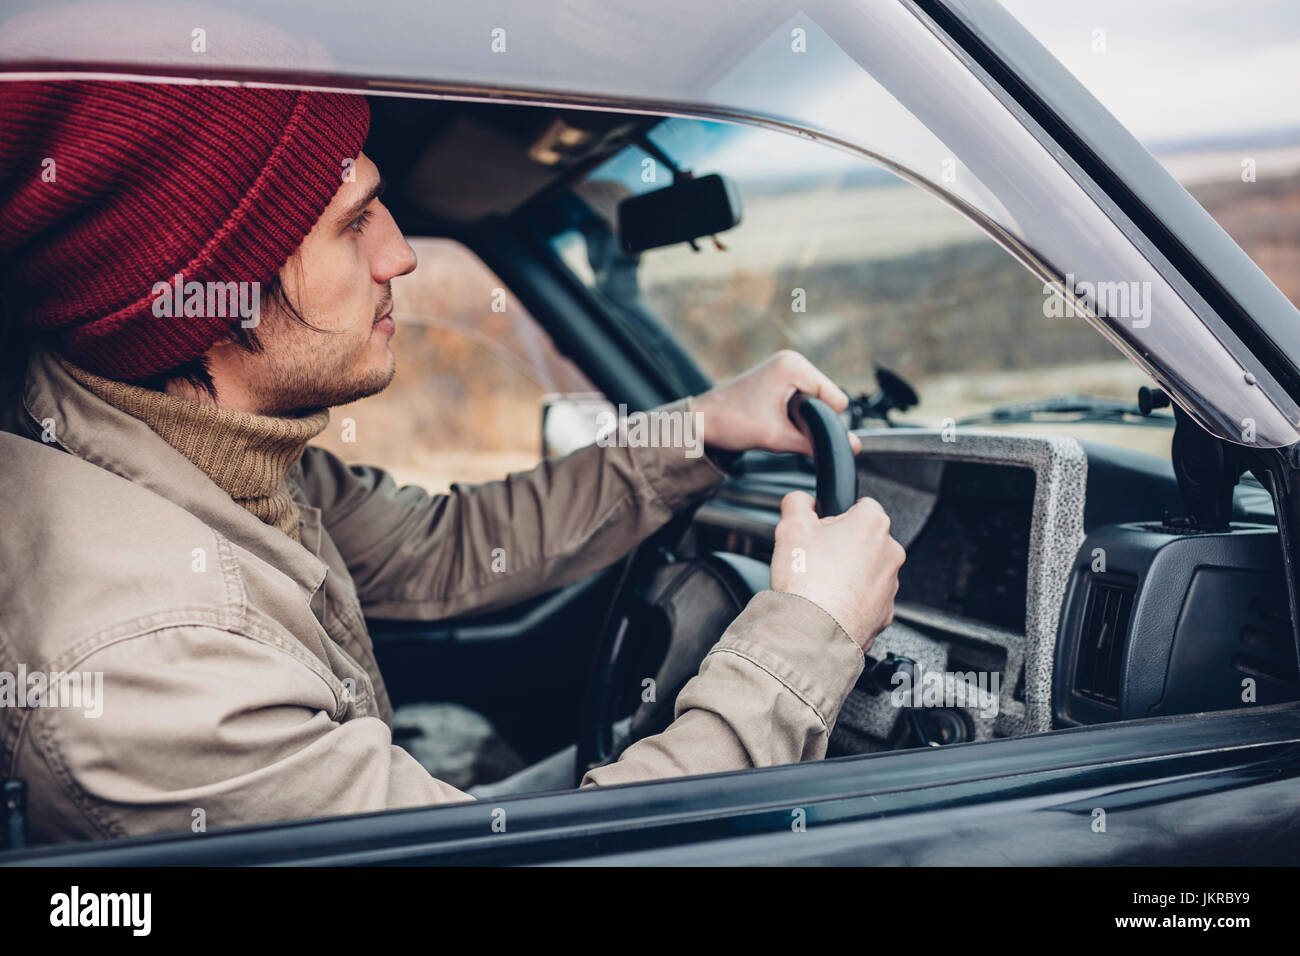 Side view of man wearing knit hat riding sport utility vehicle Stock Photo